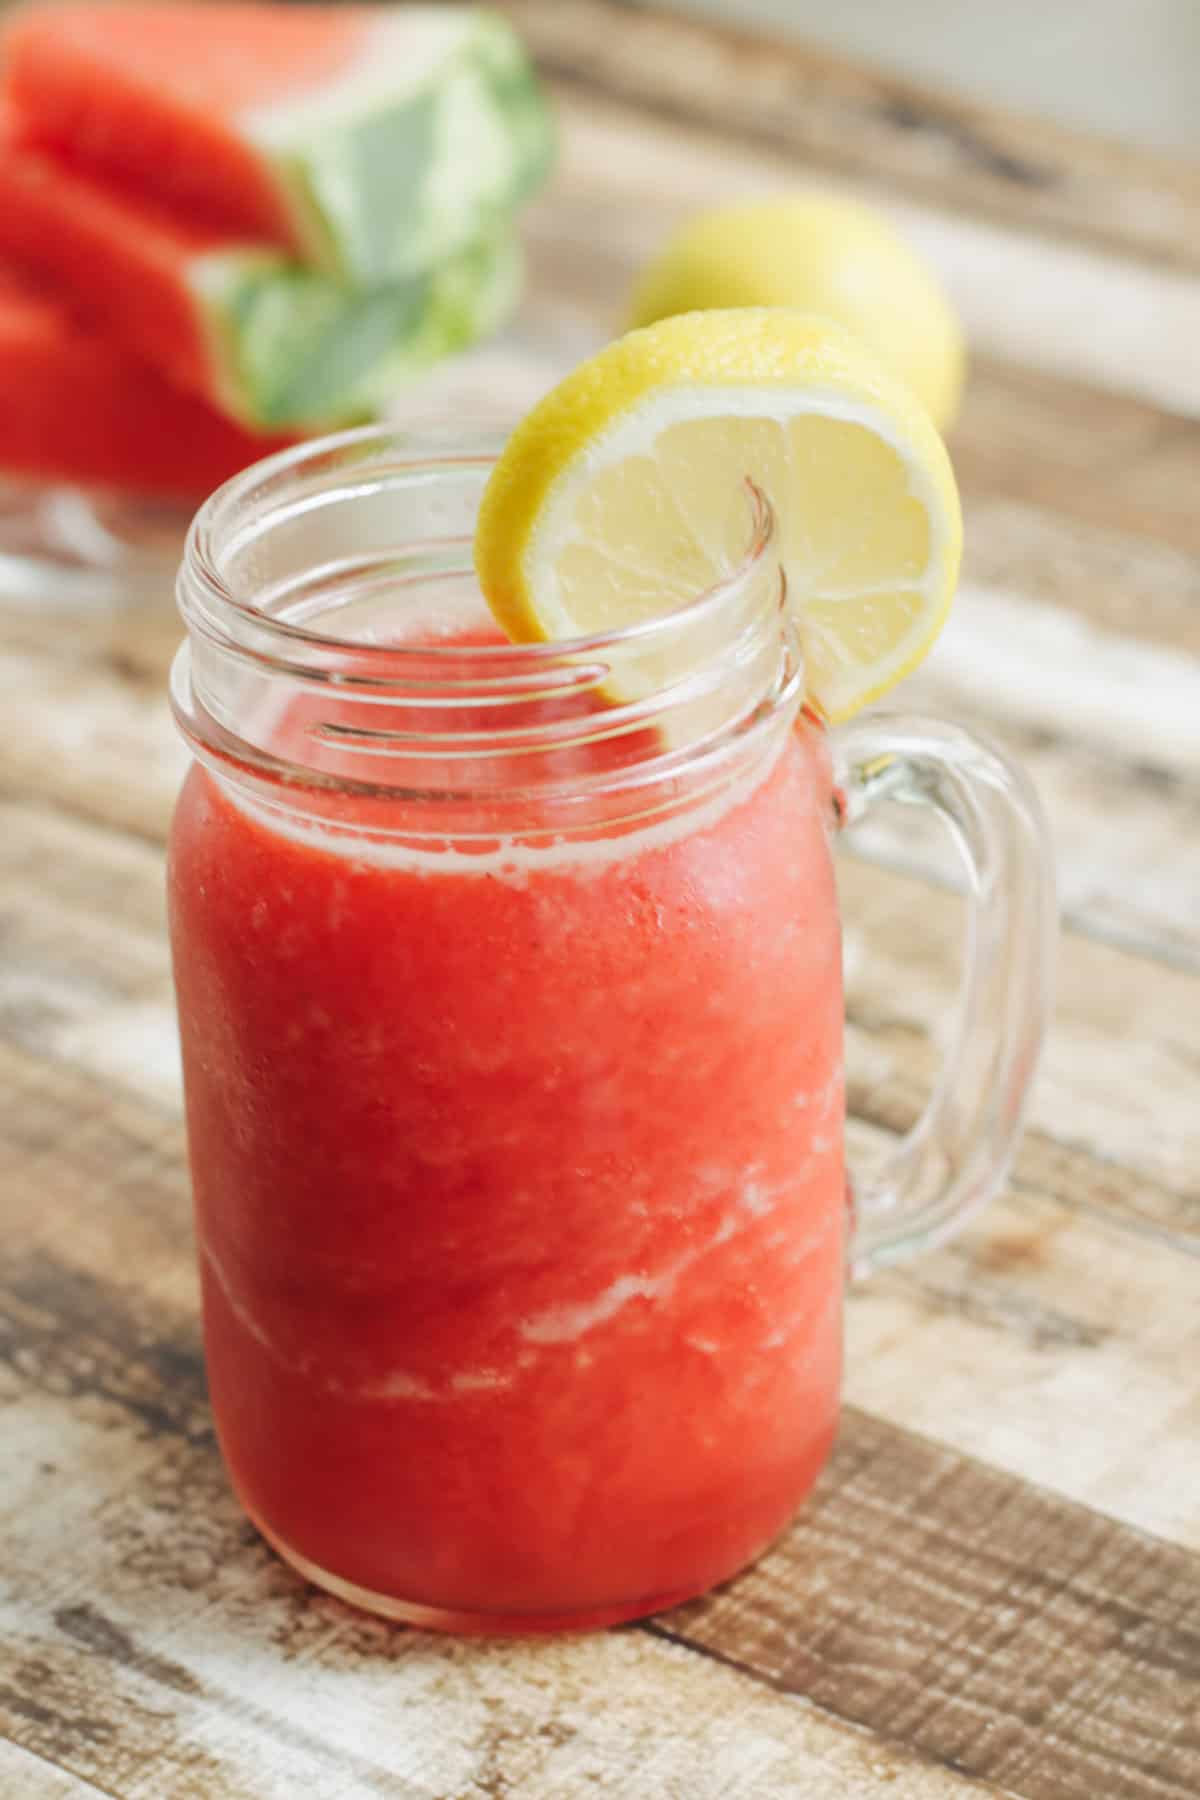 Mason jar style glass mug filled with watermelon lemonade and slice of lemon for garnish and watermelon slices in upper left background. 